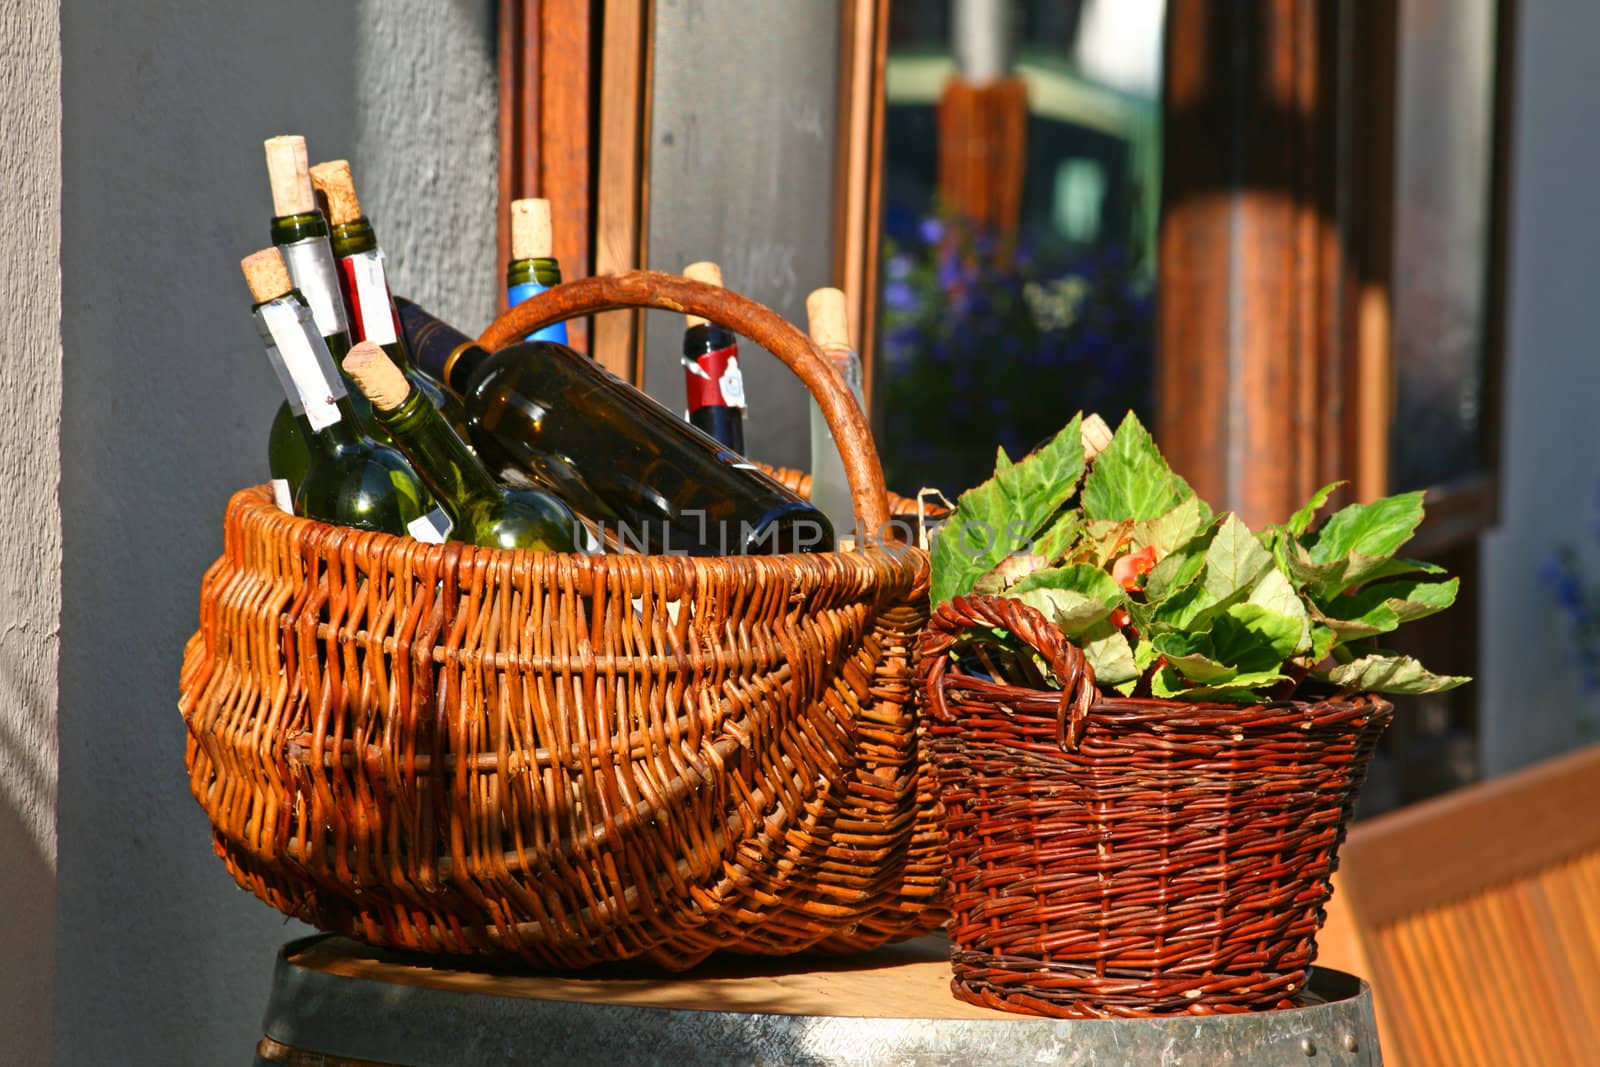 Restaurant exhibition. Two baskets with bottles of wine and salads